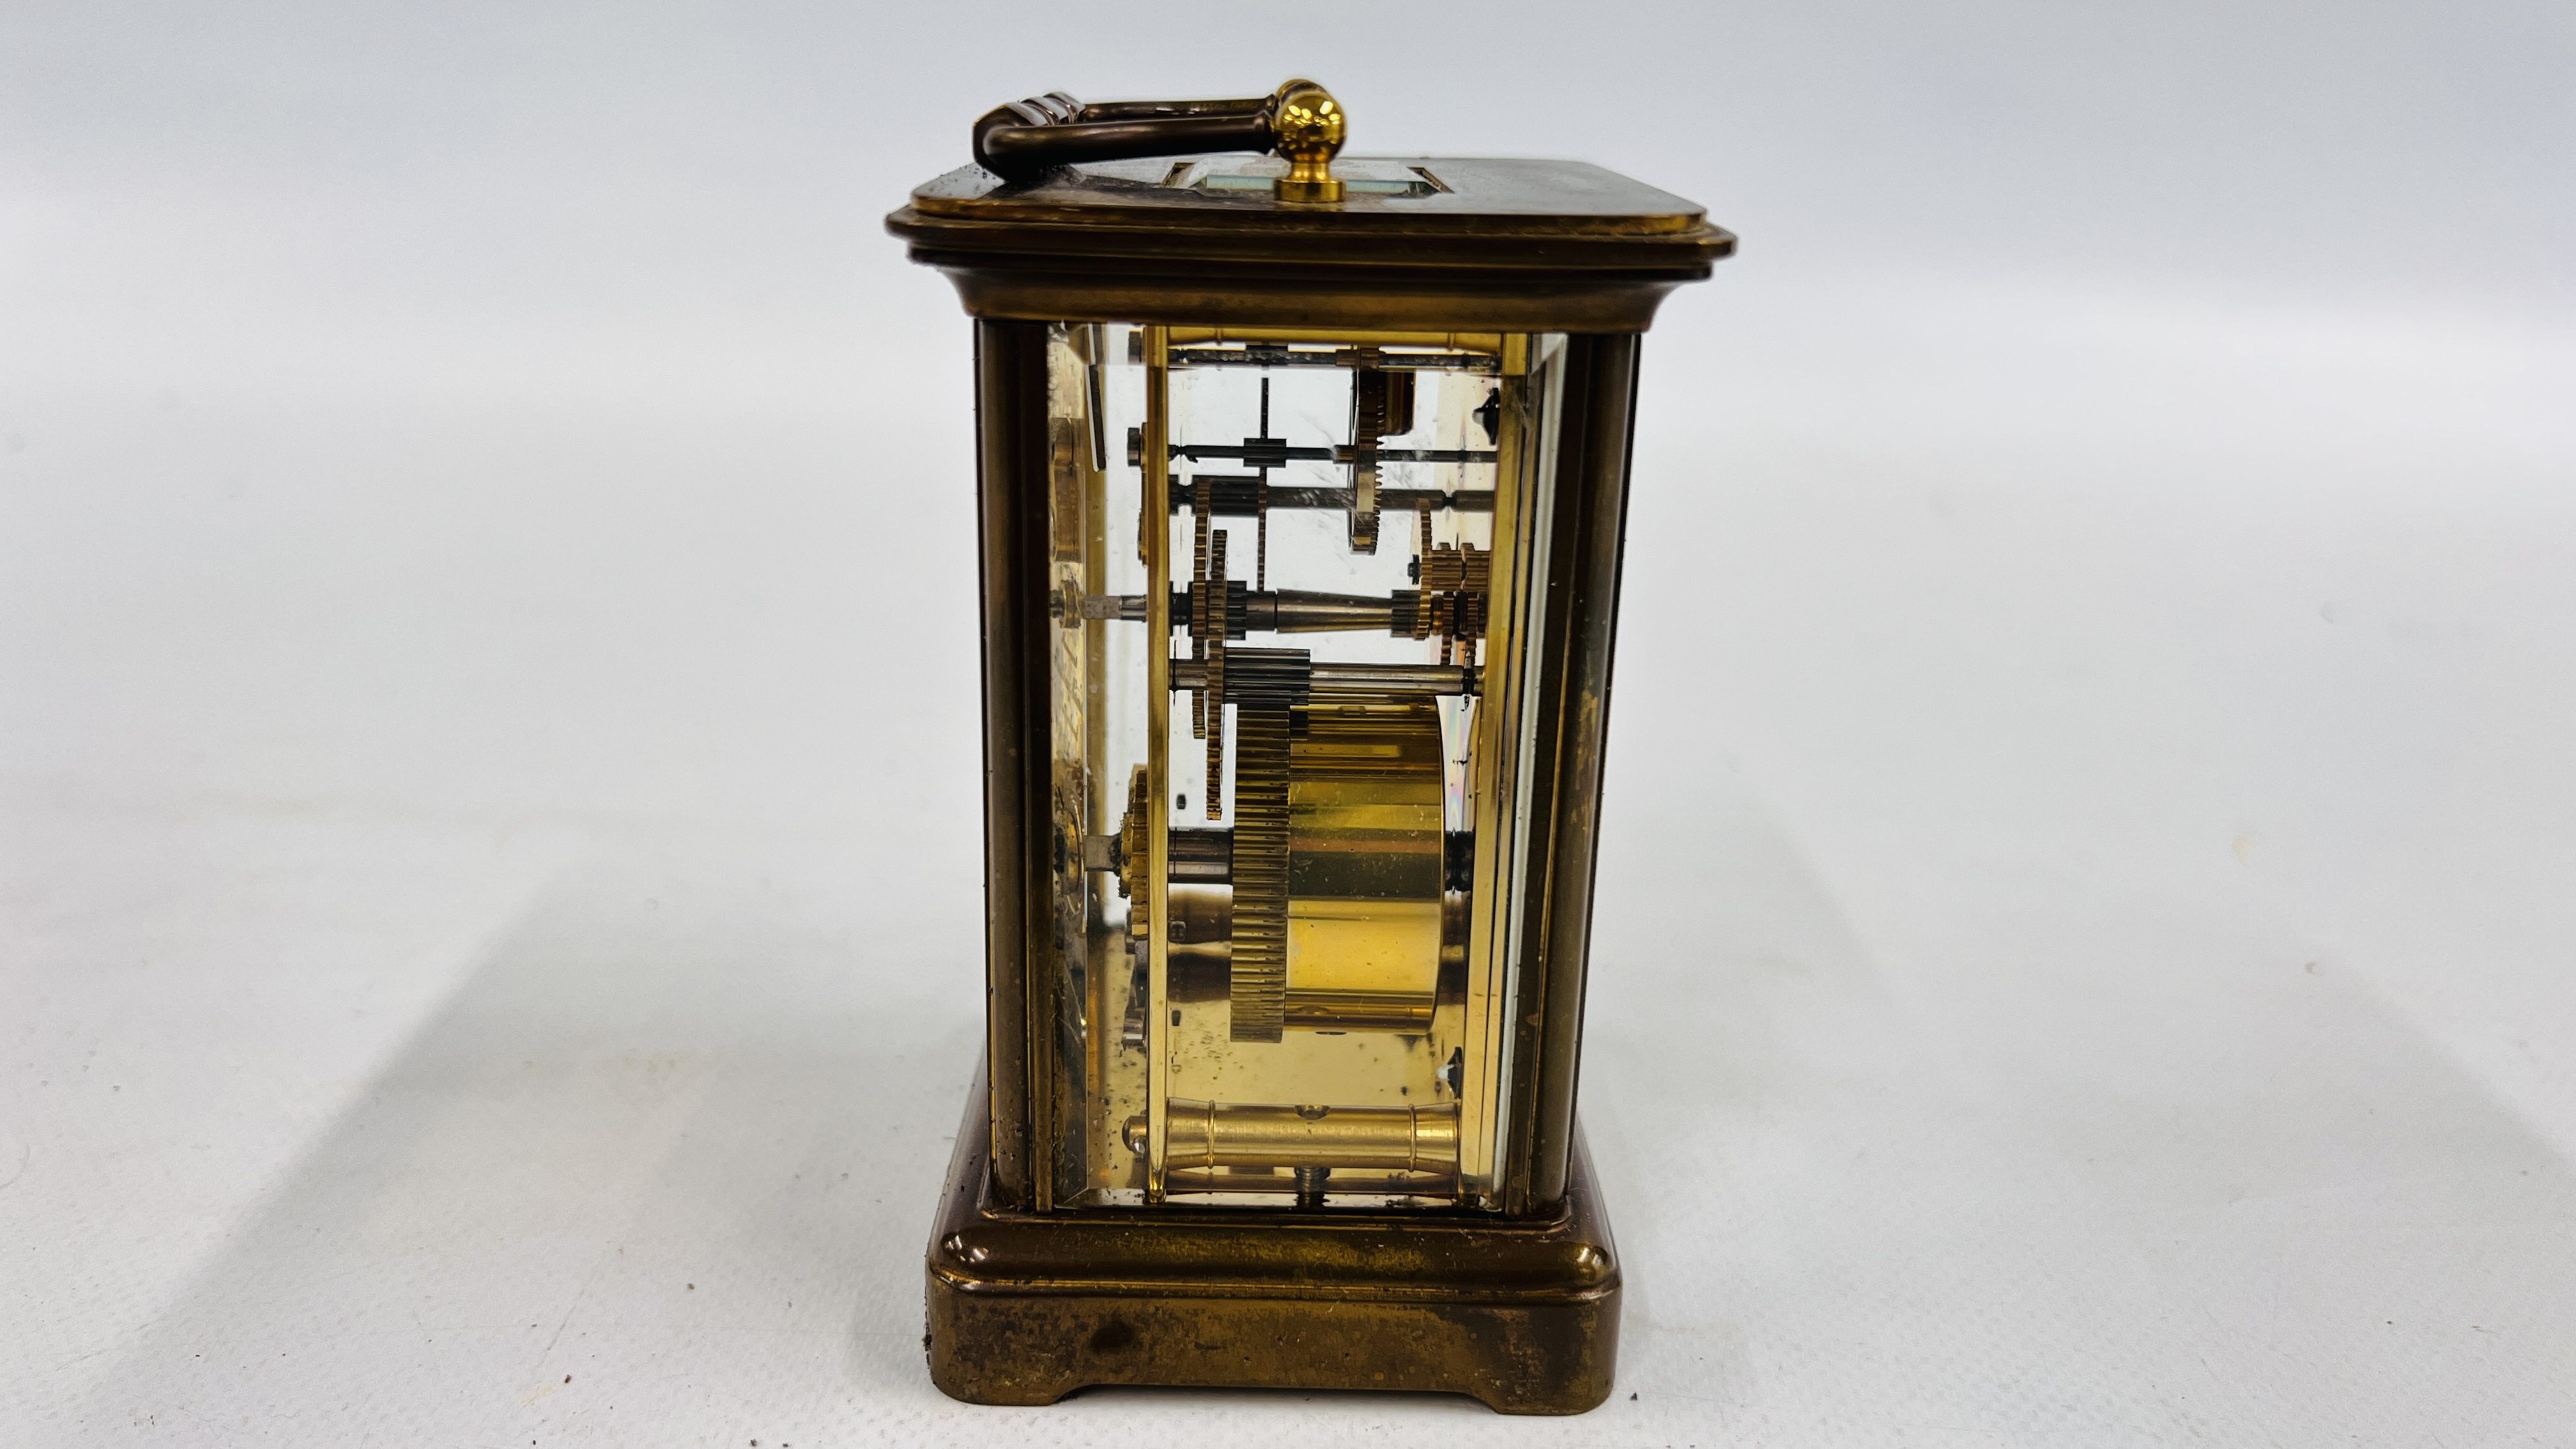 A MATTHEW NORMAN BRASS CASED CARRIAGE CLOCK WITH ORIGINAL BOX. - Image 9 of 9